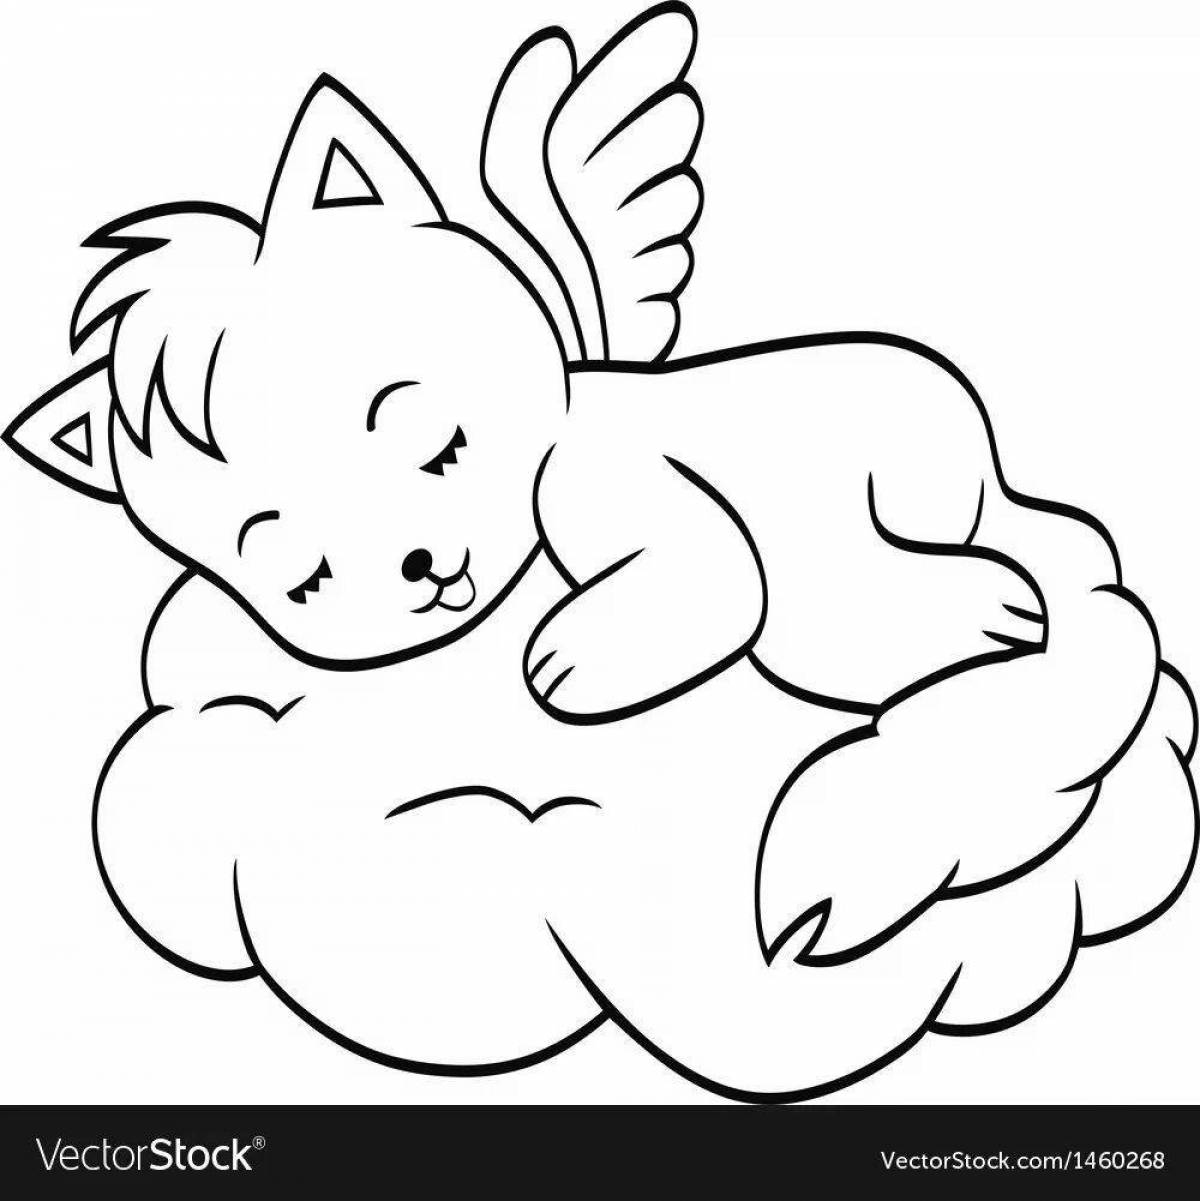 Coloring page adorable angel cat